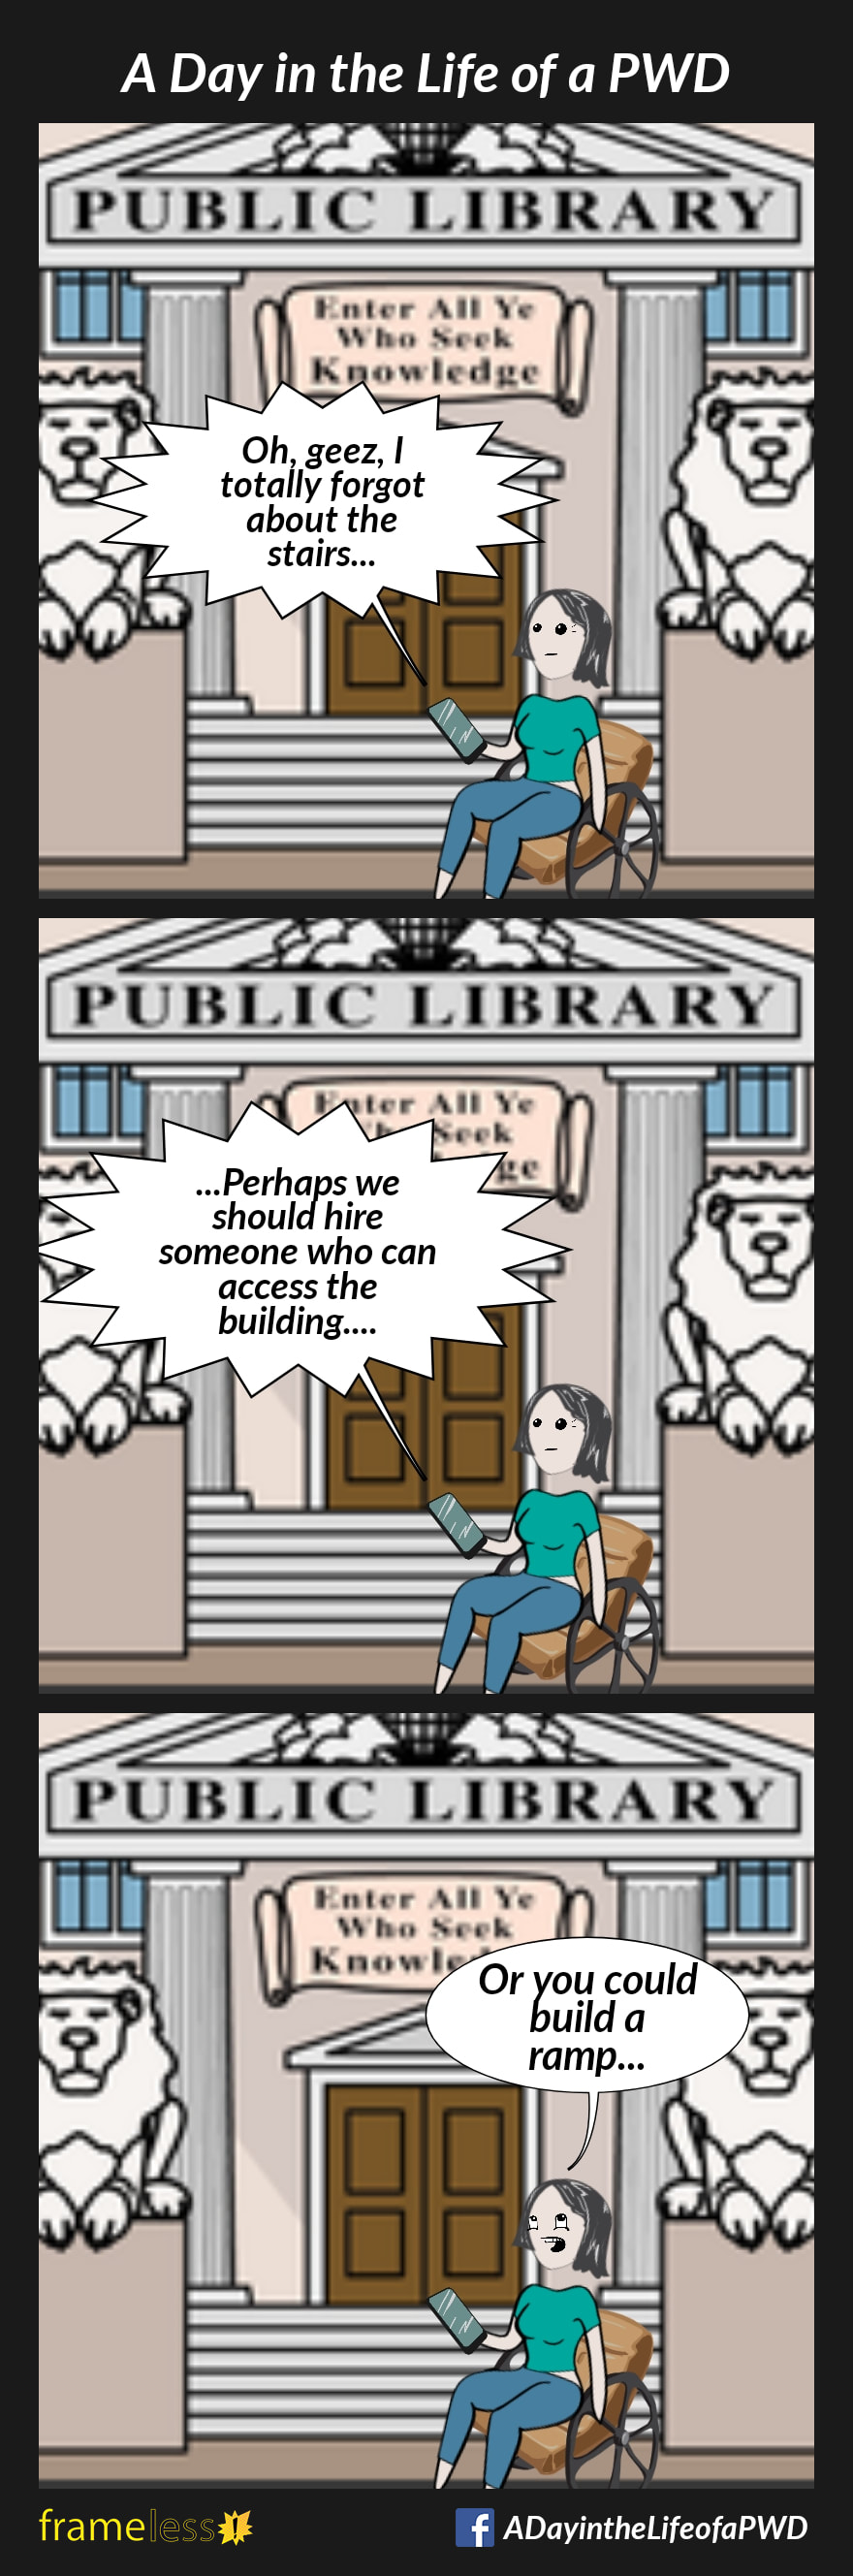 COMIC STRIP 
A Day in the Life of a PWD 

Frame 1:
A woman in a wheelchair has arrived for a job interview at the library. There are steps to the entrance. She is on the phone to the employer.
EMPLOYER: Oh, geez, I totally forgot about the stairs...

Frame 2:
EMPLOYER: ...Perhaps we should hire someone who can access the building...

Frame 3:
WOMAN: Or you could build a ramp...